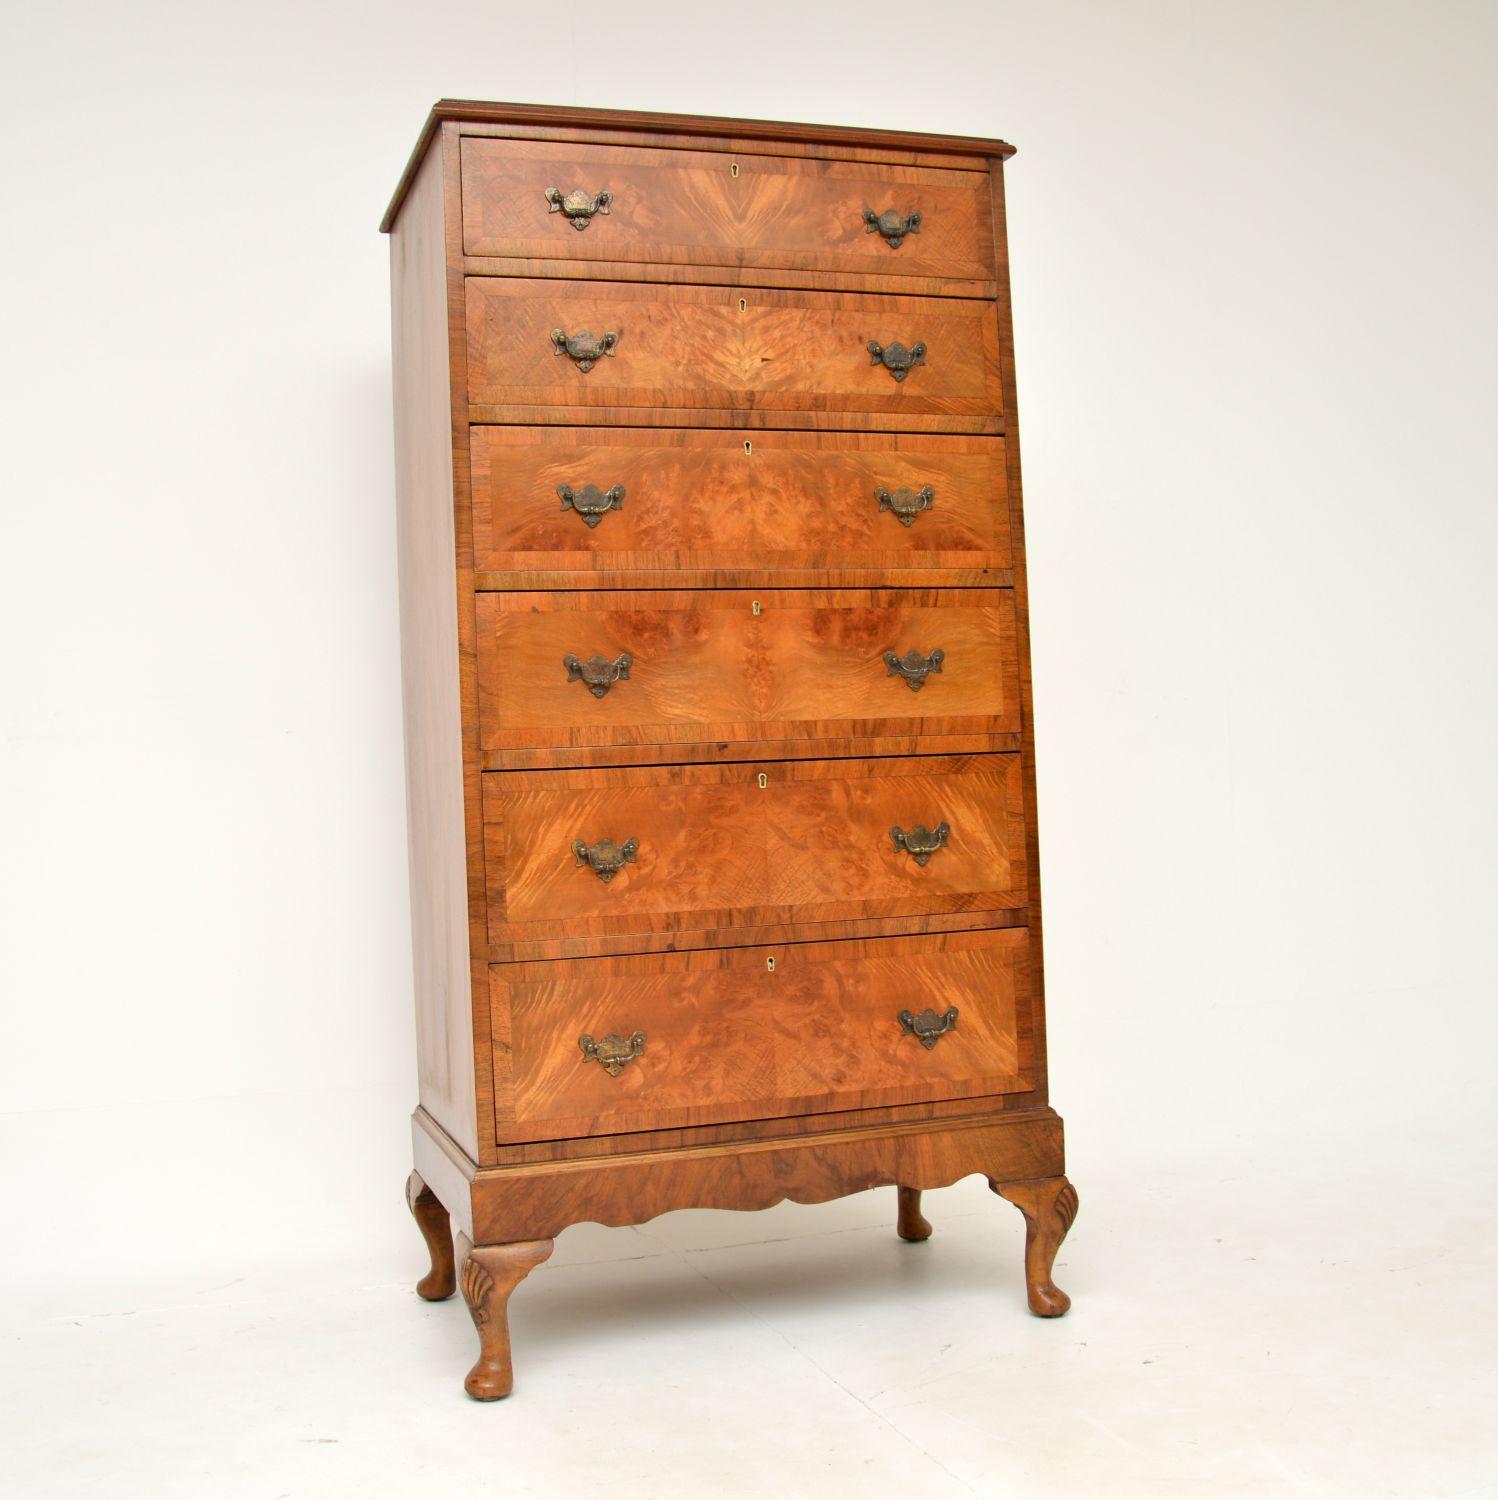 A superb antique tallboy chest of drawers in burr walnut. This was made in England, it dates from the 1900-1920 period.

It is of extremely high quality and offers lots of storage space in the six generous drawers that are graduated in depth. The